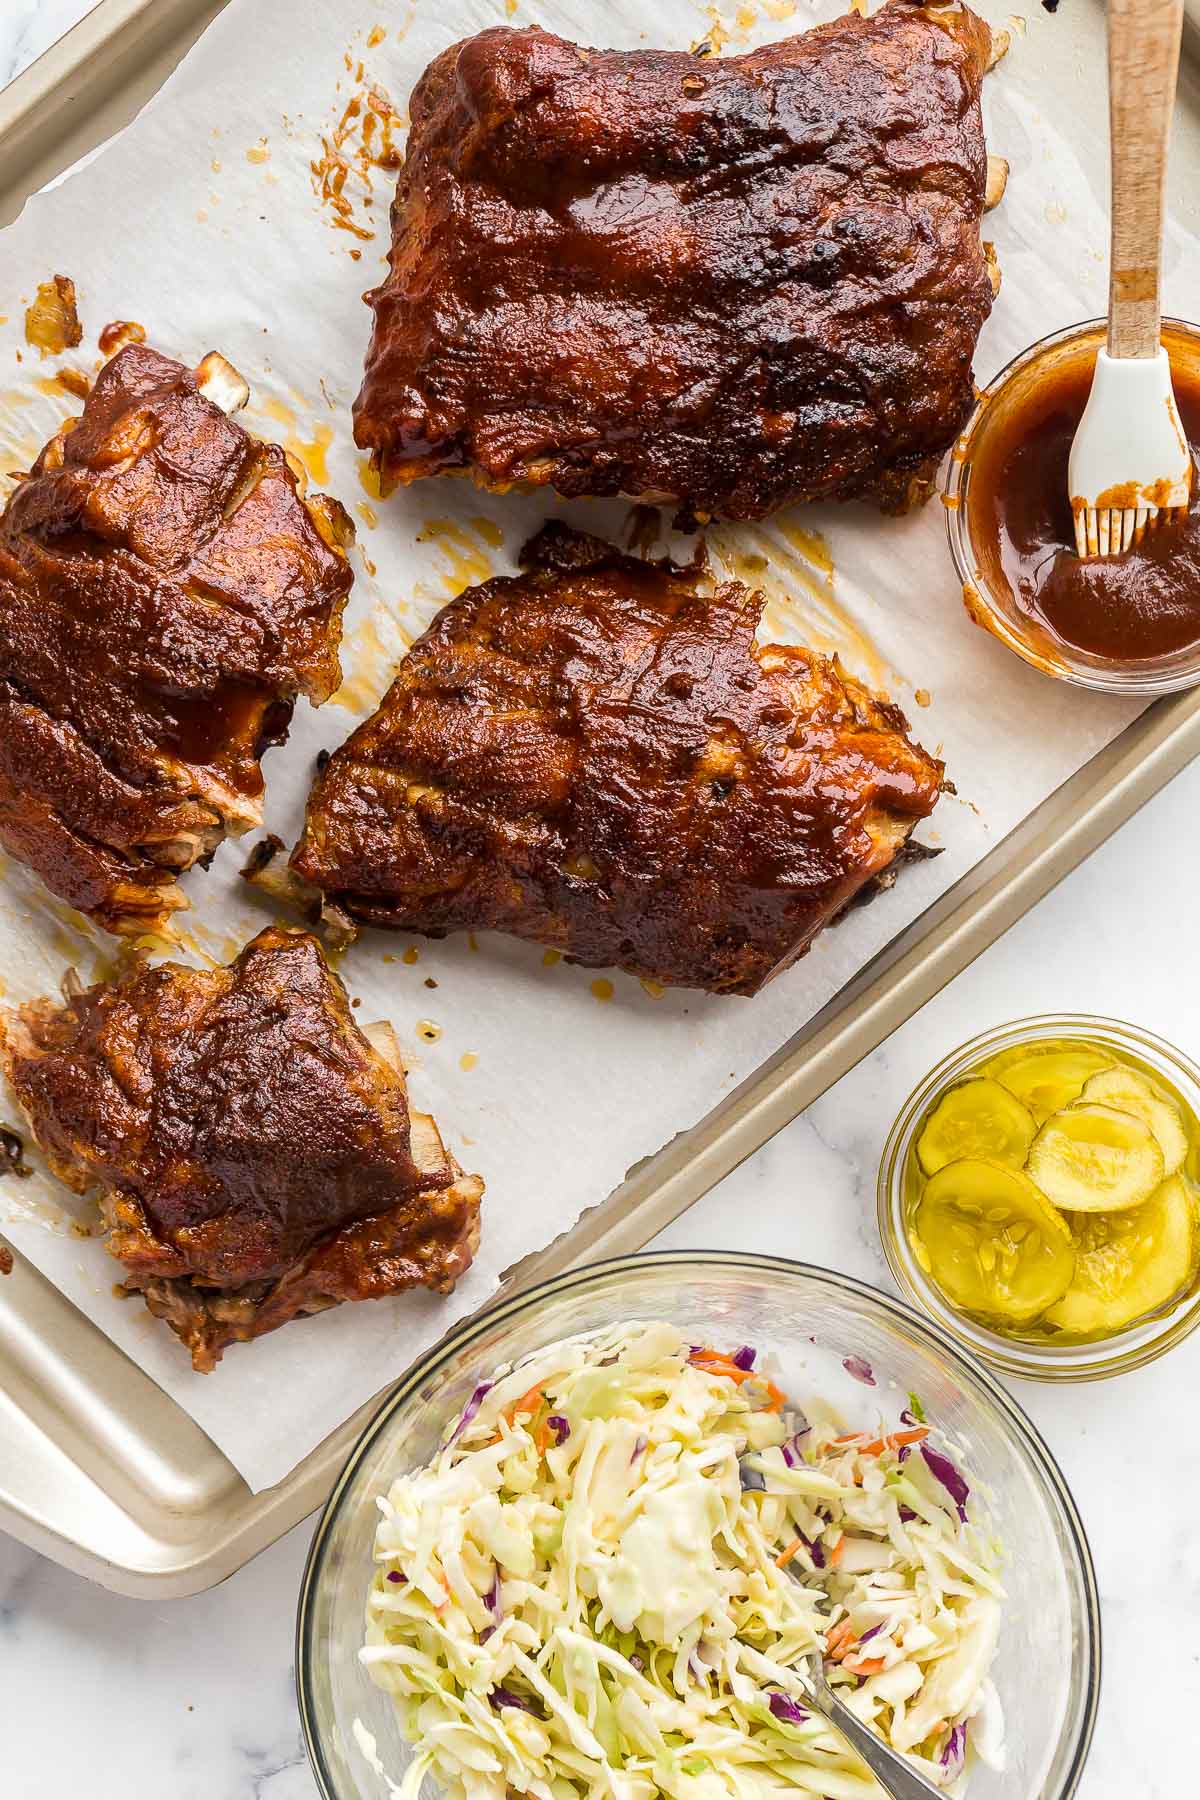 Easy Slow Cooker BBQ Ribs + VIDEO - The Recipe Rebel